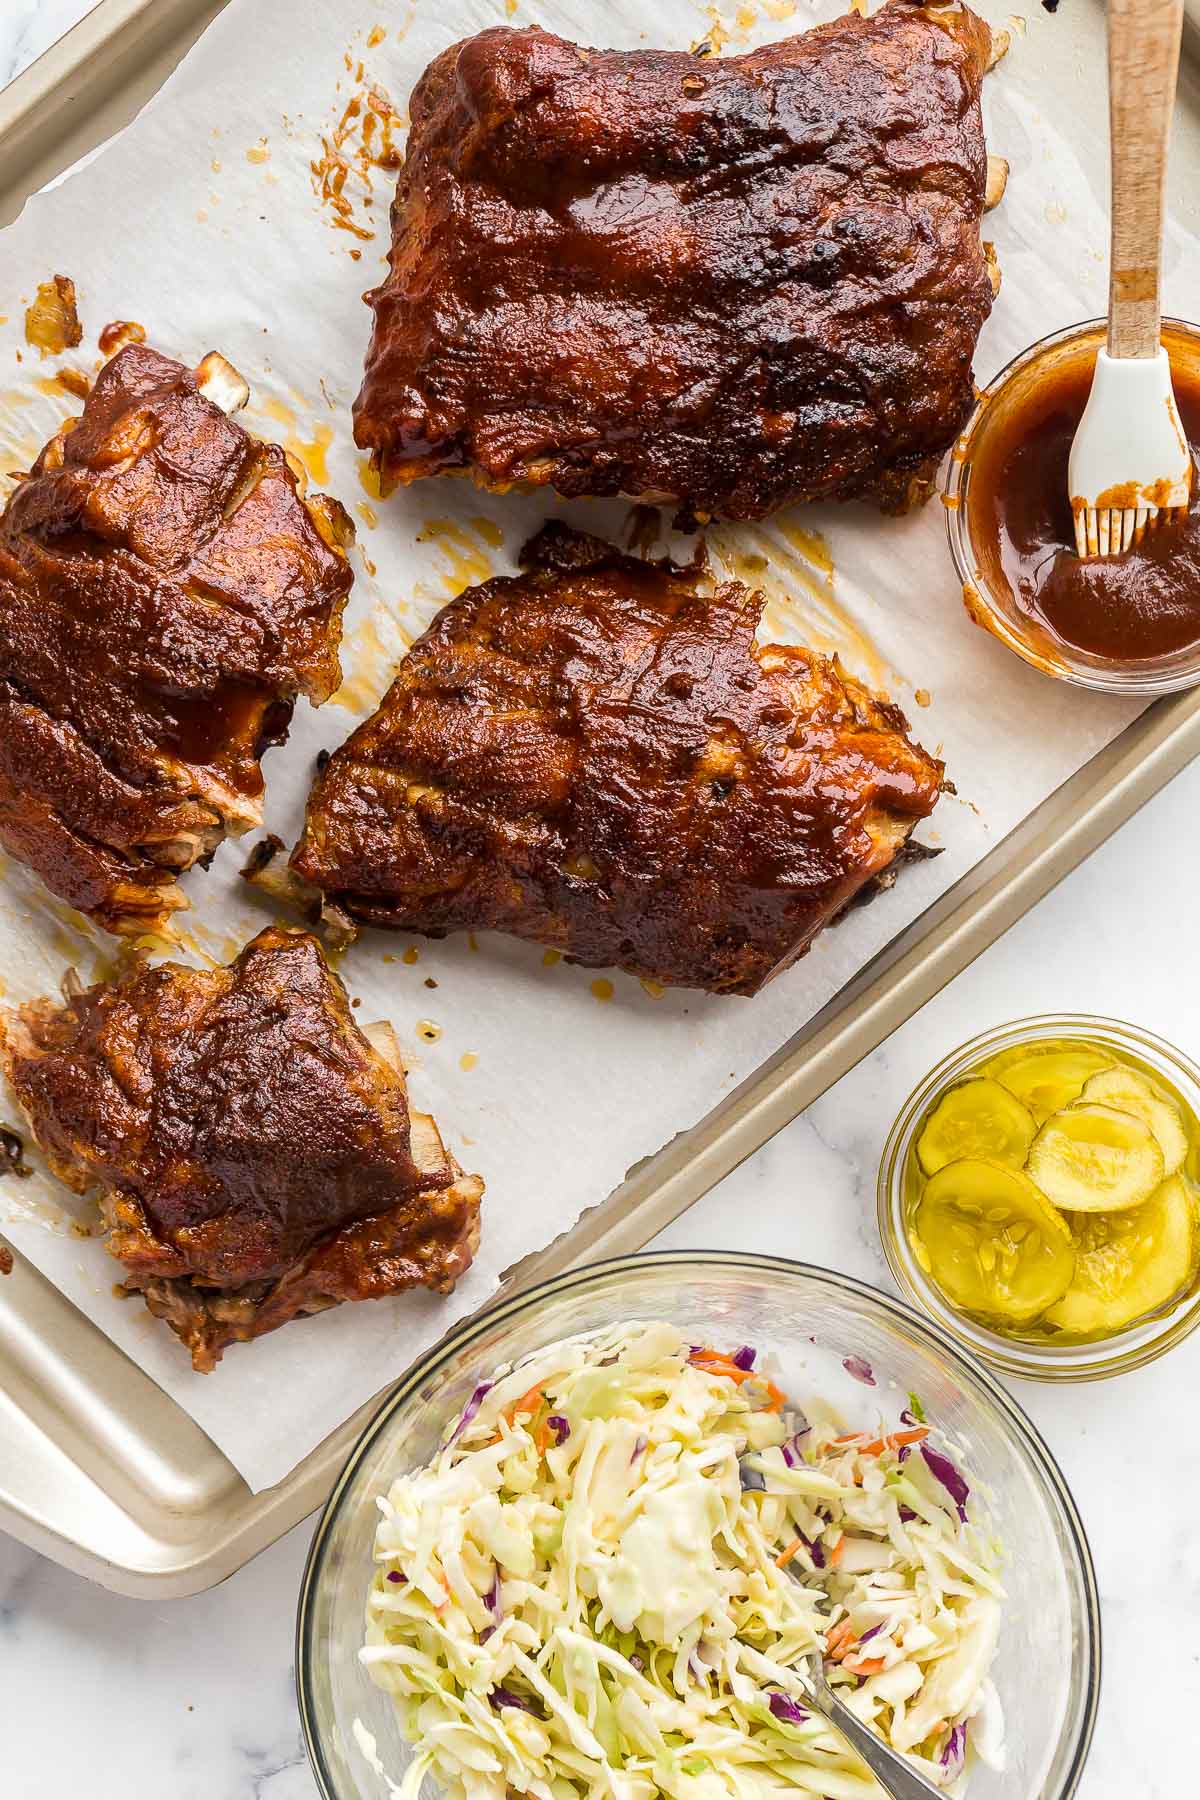 Easy Slow Cooker BBQ Ribs + VIDEO - The Recipe Rebel